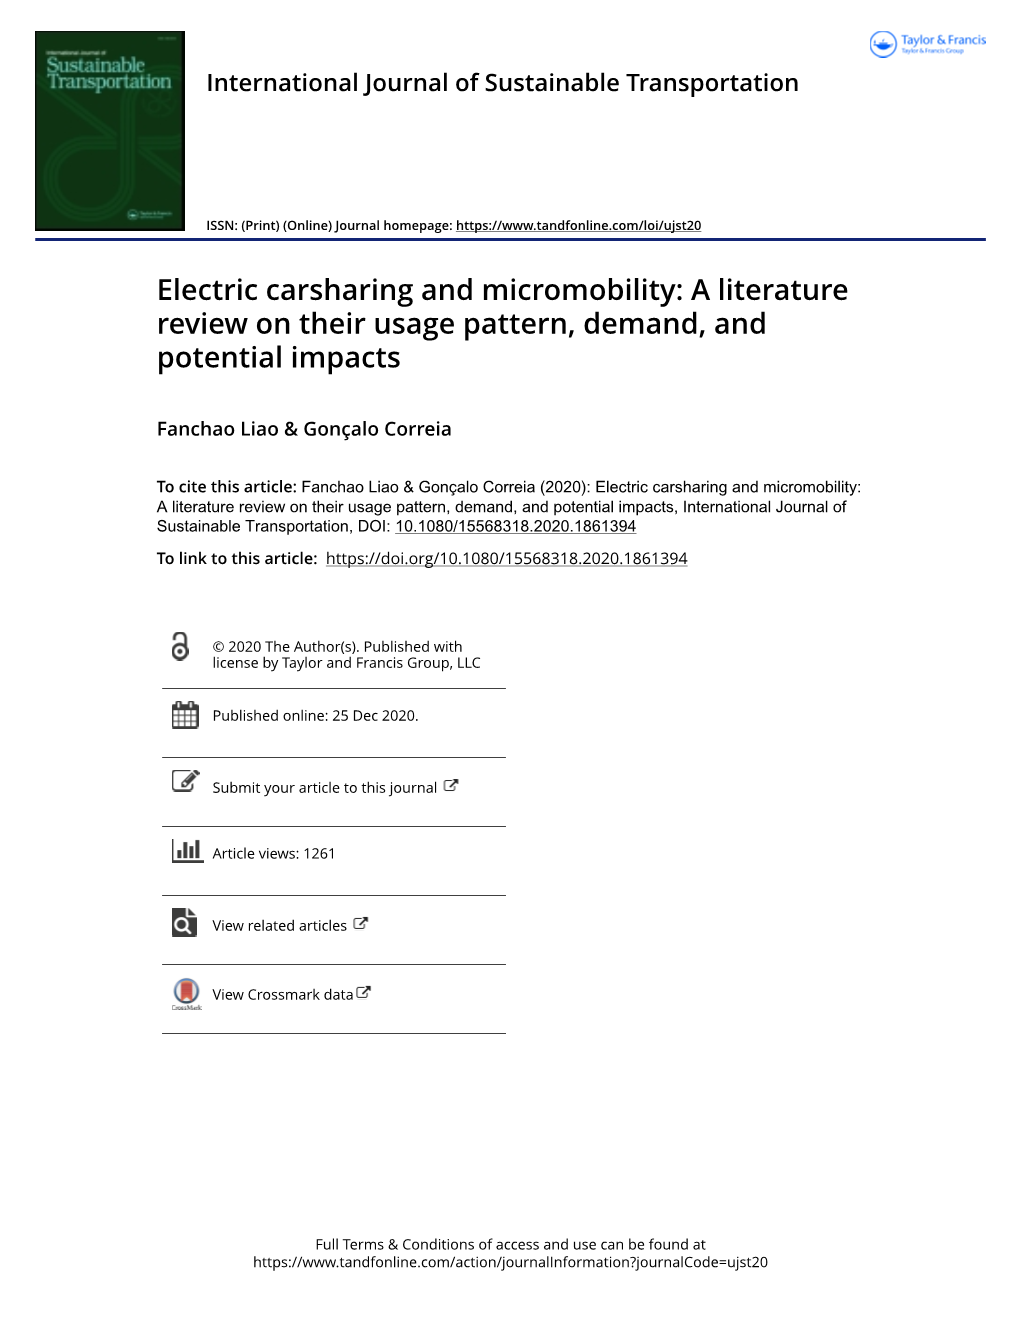 Electric Carsharing and Micromobility: a Literature Review on Their Usage Pattern, Demand, and Potential Impacts